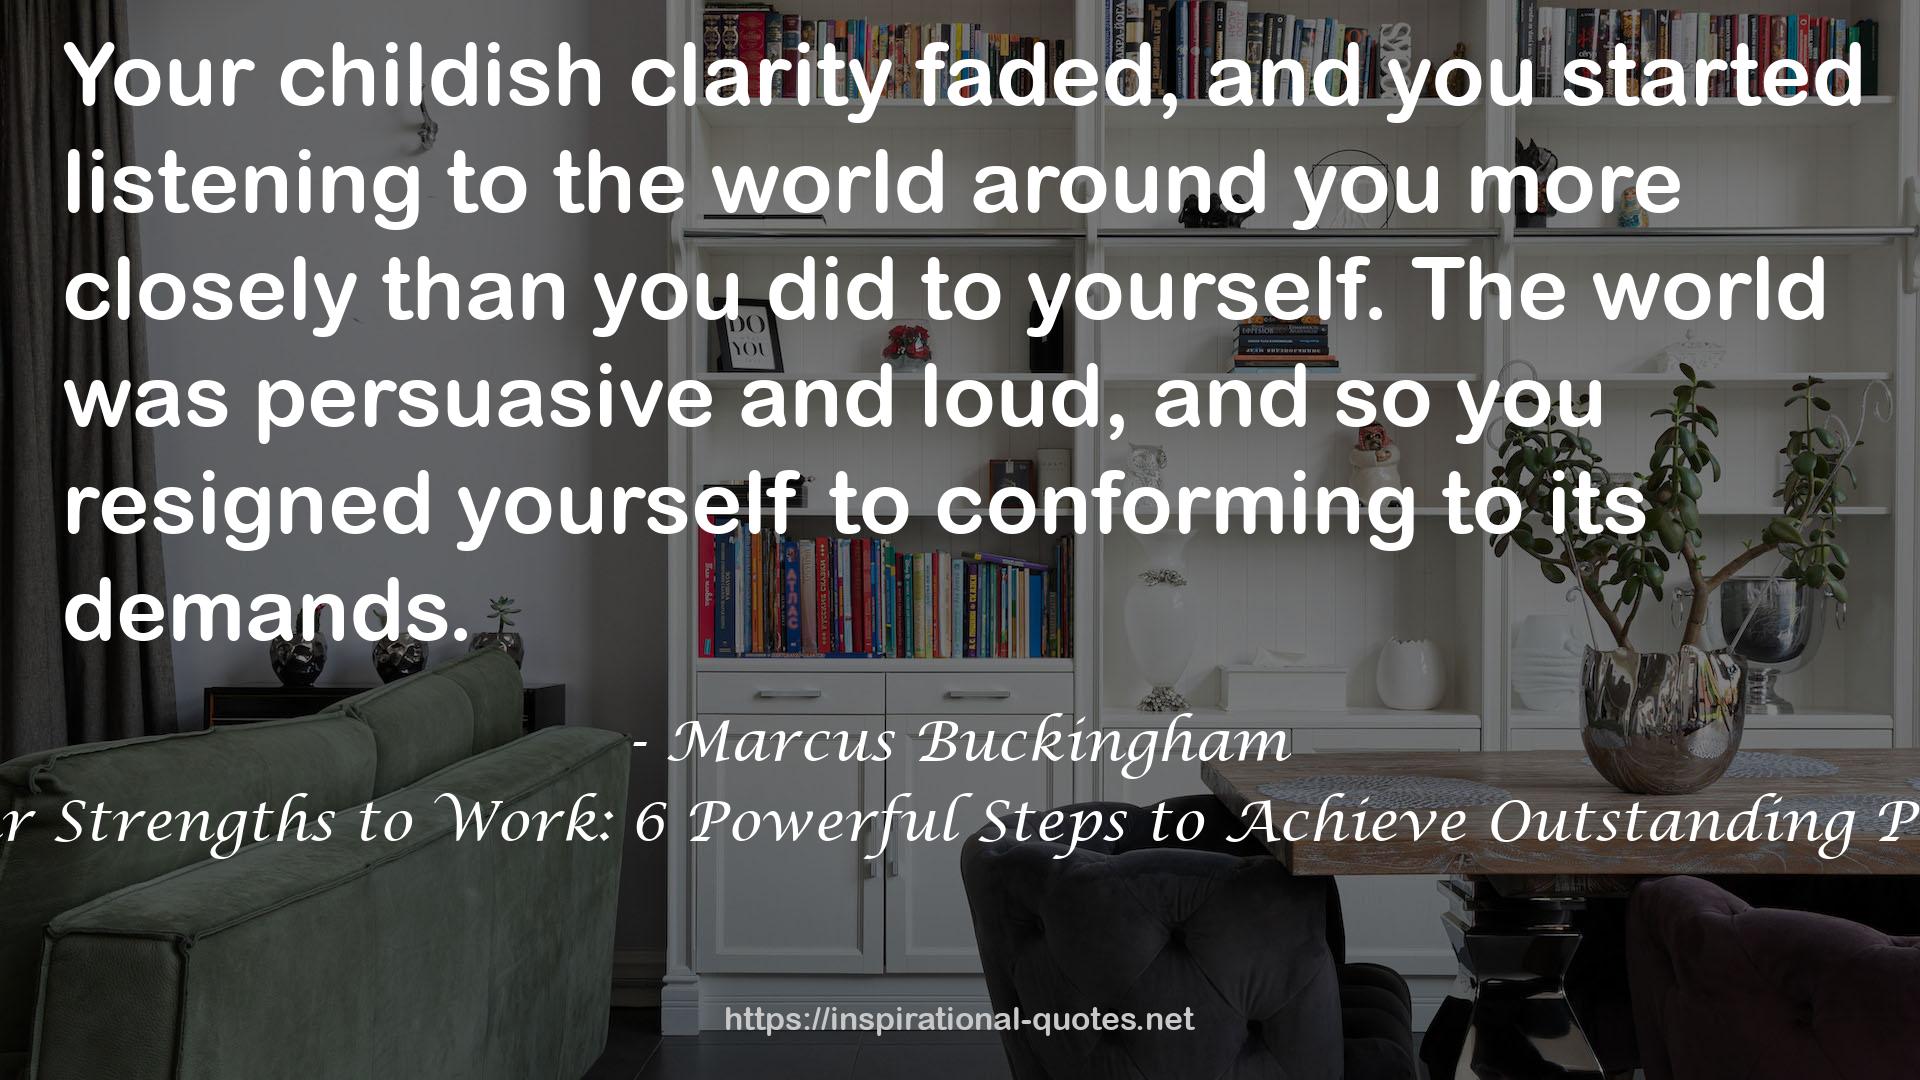 Go Put Your Strengths to Work: 6 Powerful Steps to Achieve Outstanding Performance QUOTES